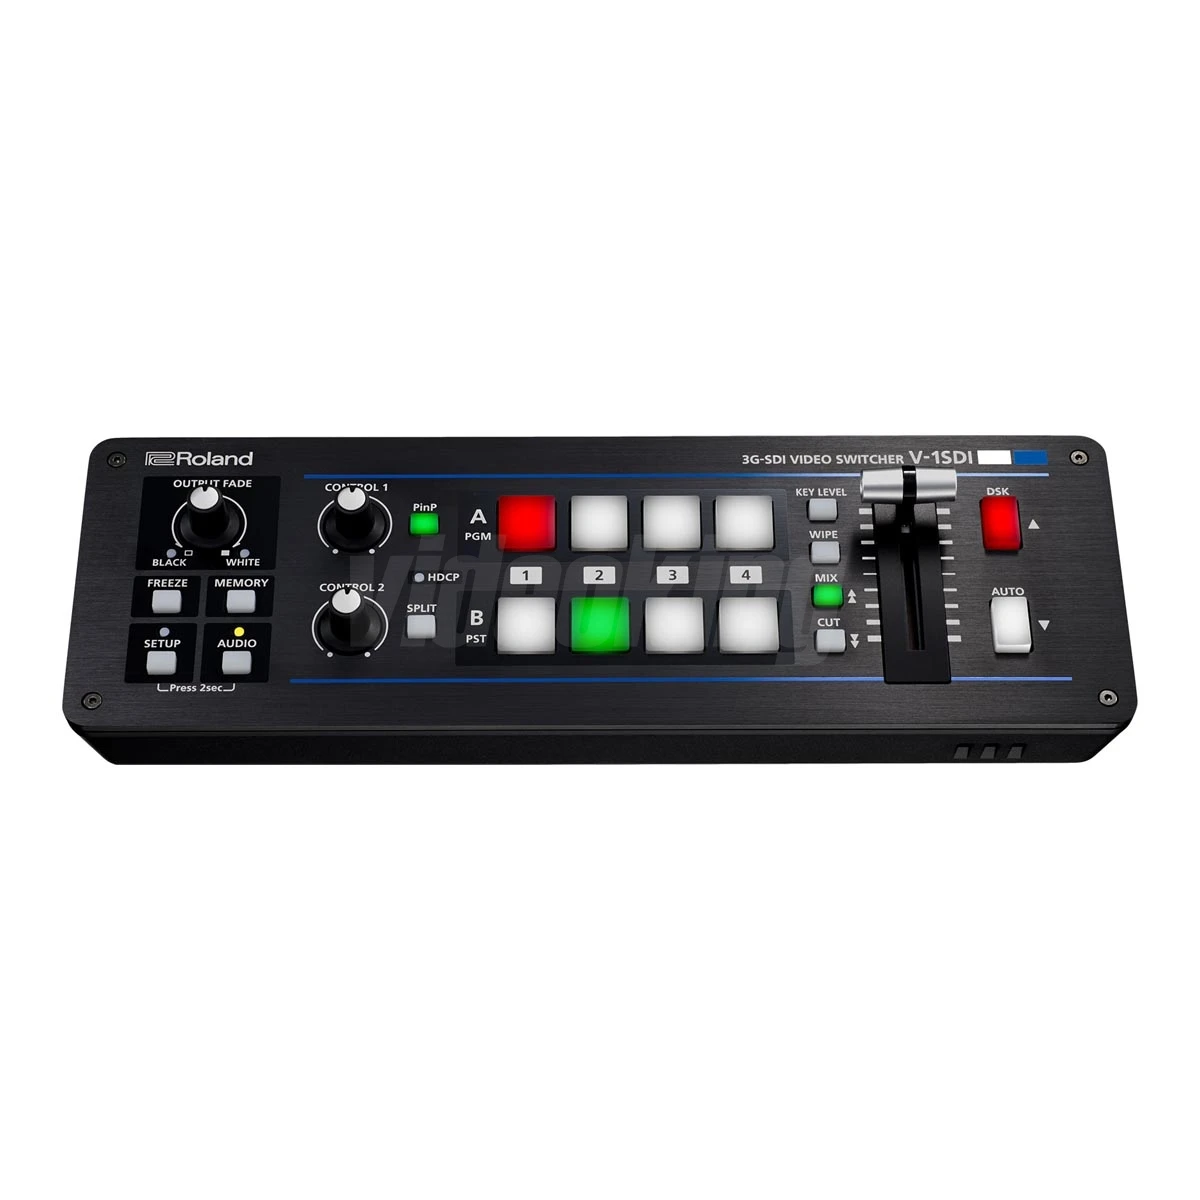 

ORIGINAL NEW RolandsV-1SDI 4-Channel HD Video Switcher Available READY TO SHIP